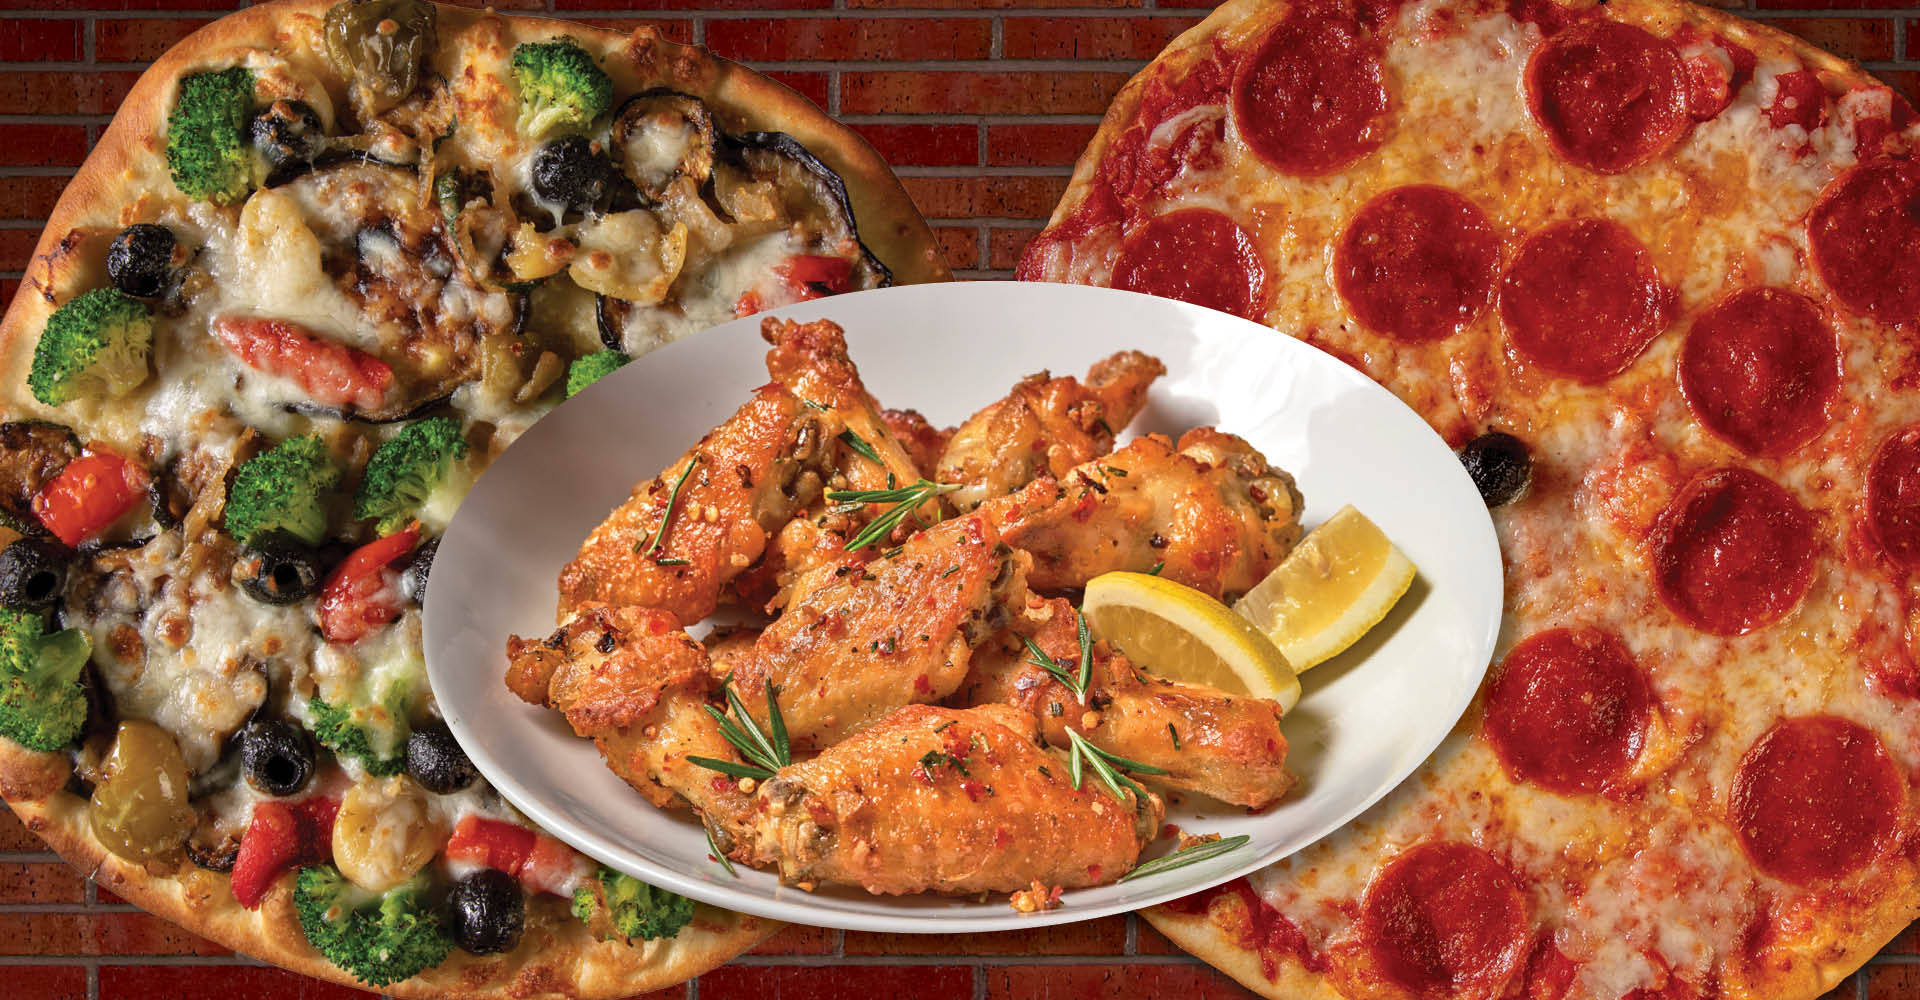 Lemon and rosemary chicken wings in front of two Bertucci's pizzas